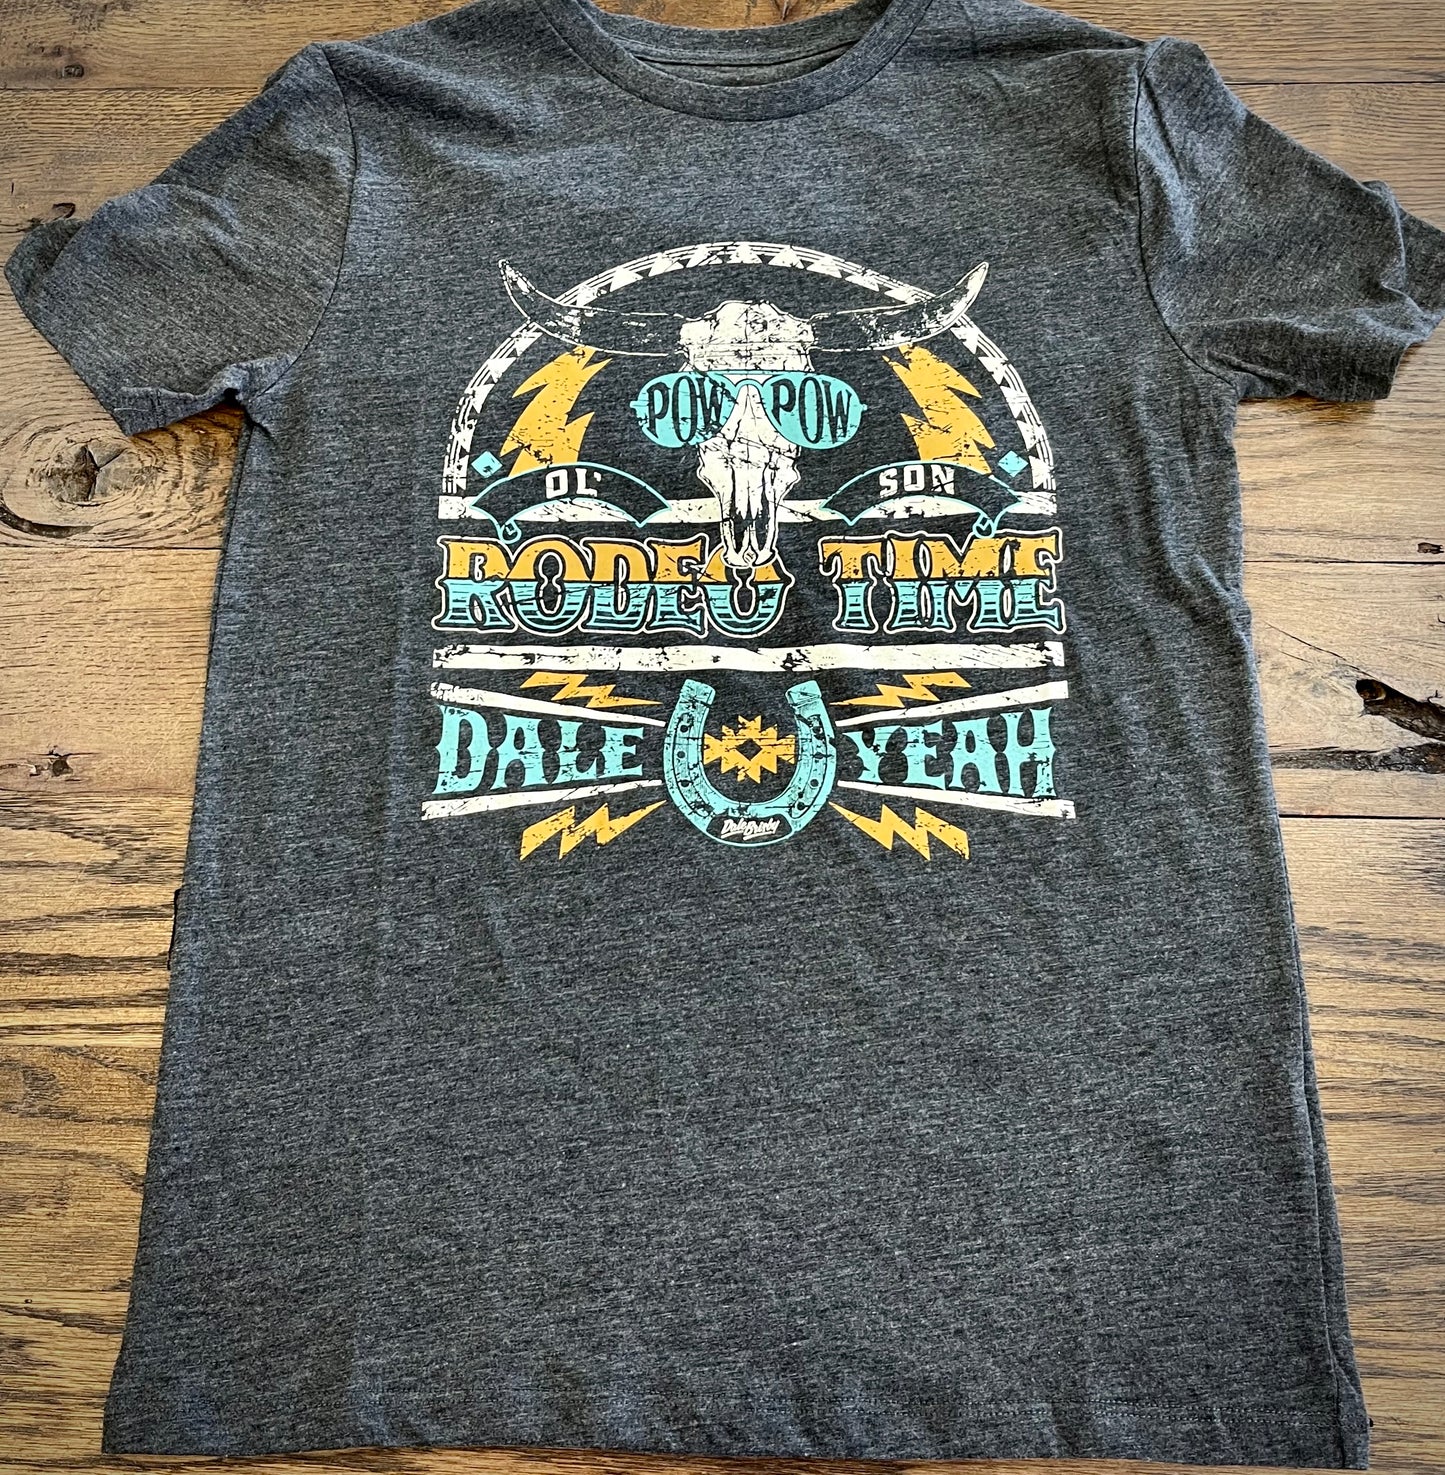 ROCK & ROLL MENS DALE BRISBY TEAL/MUSTARD RODEO TIME